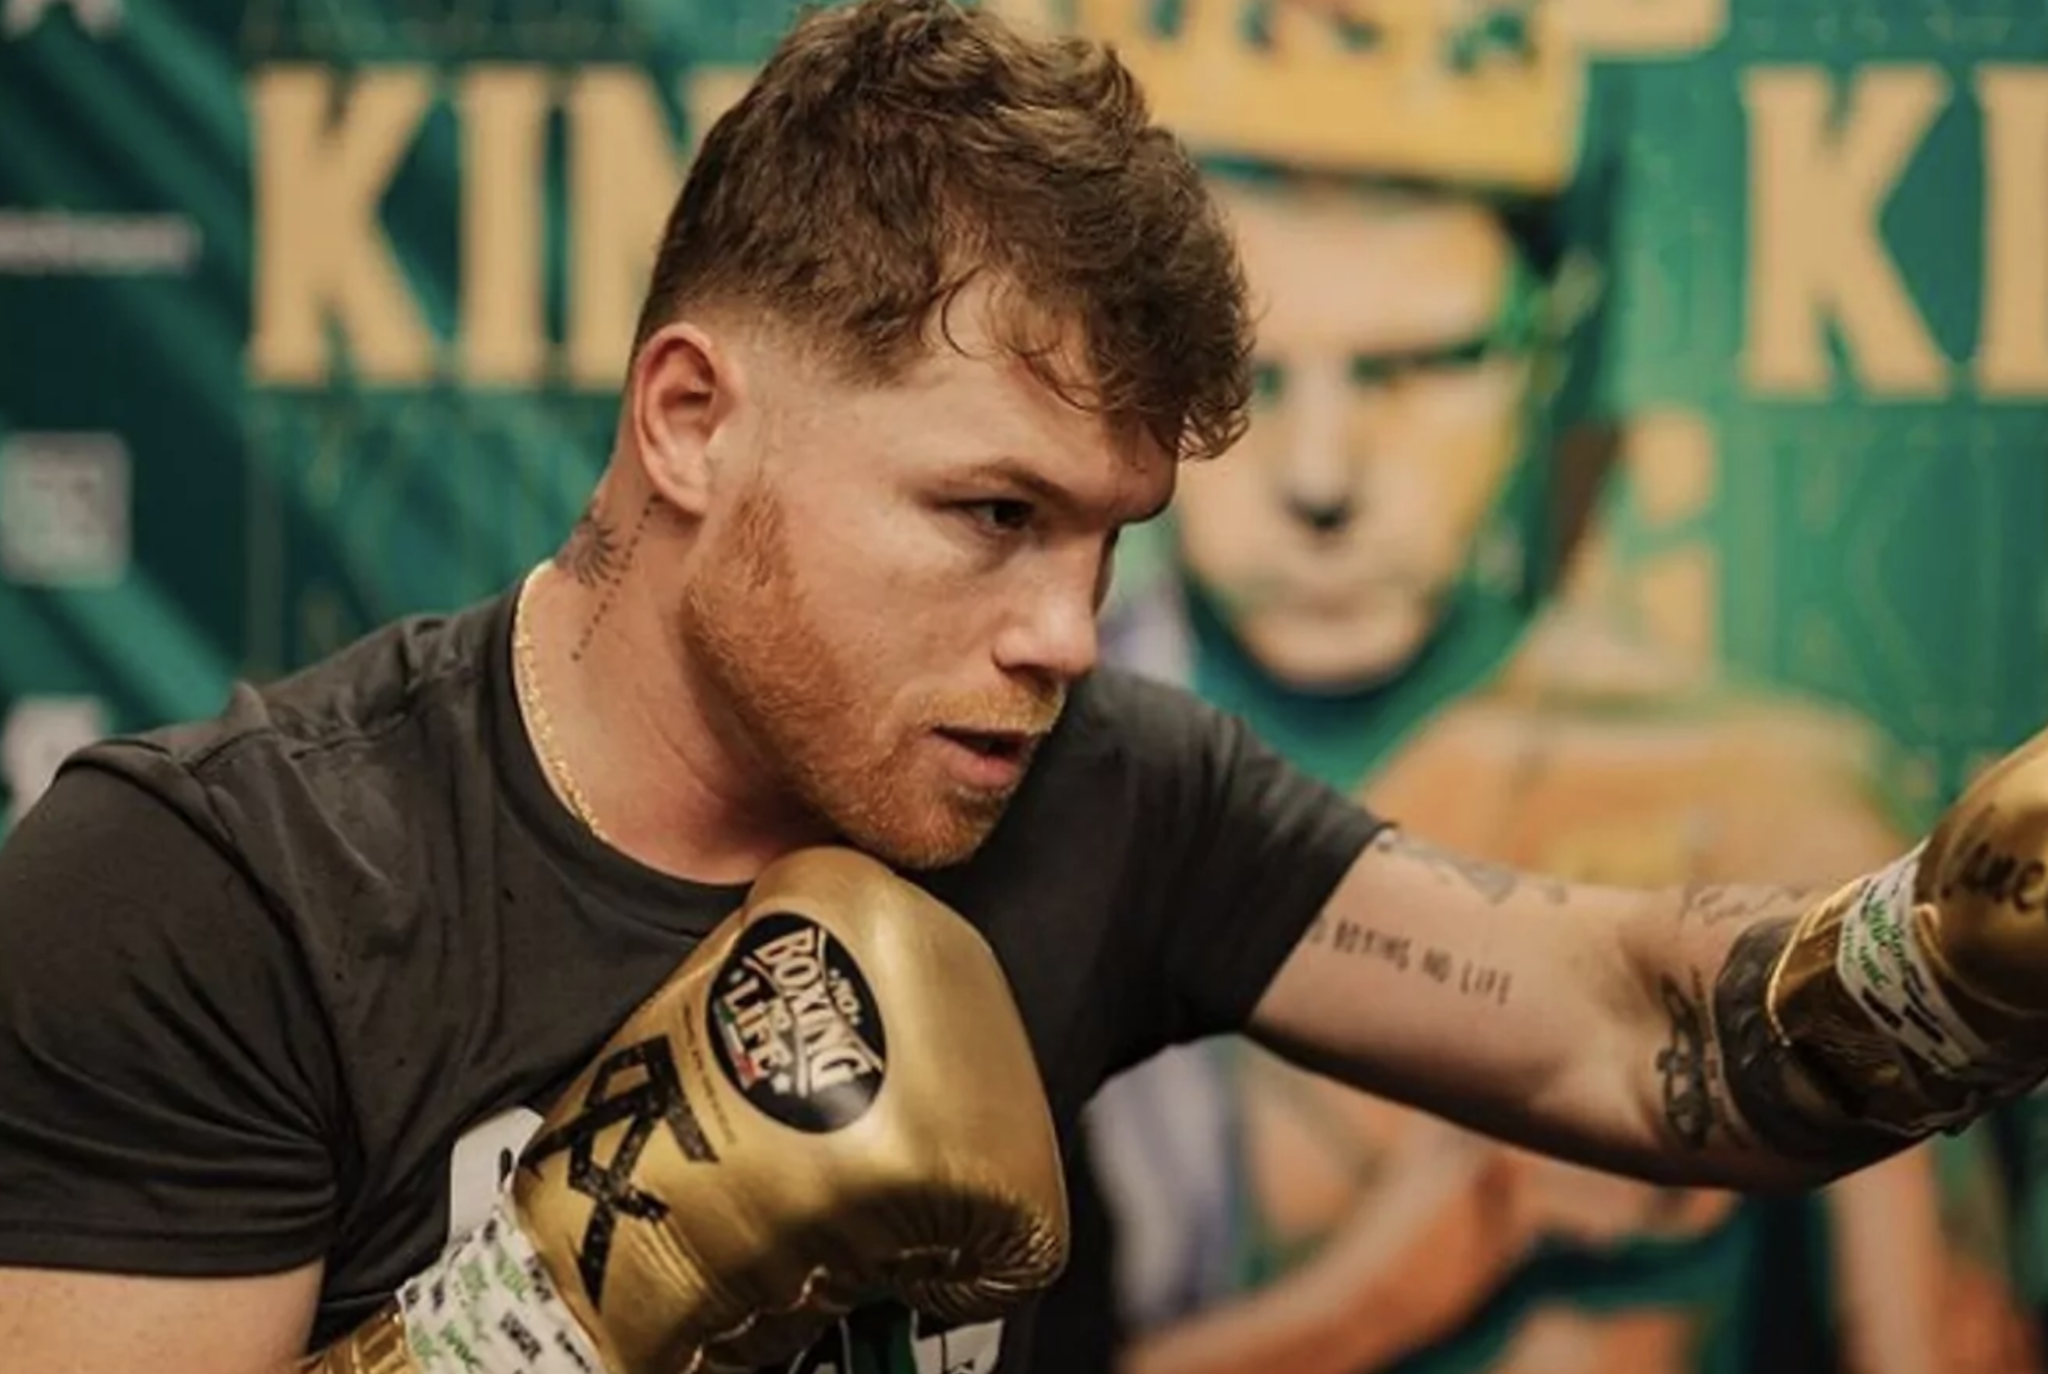 Canelo Alvarez and his fortune: How did he earn so much in one year?